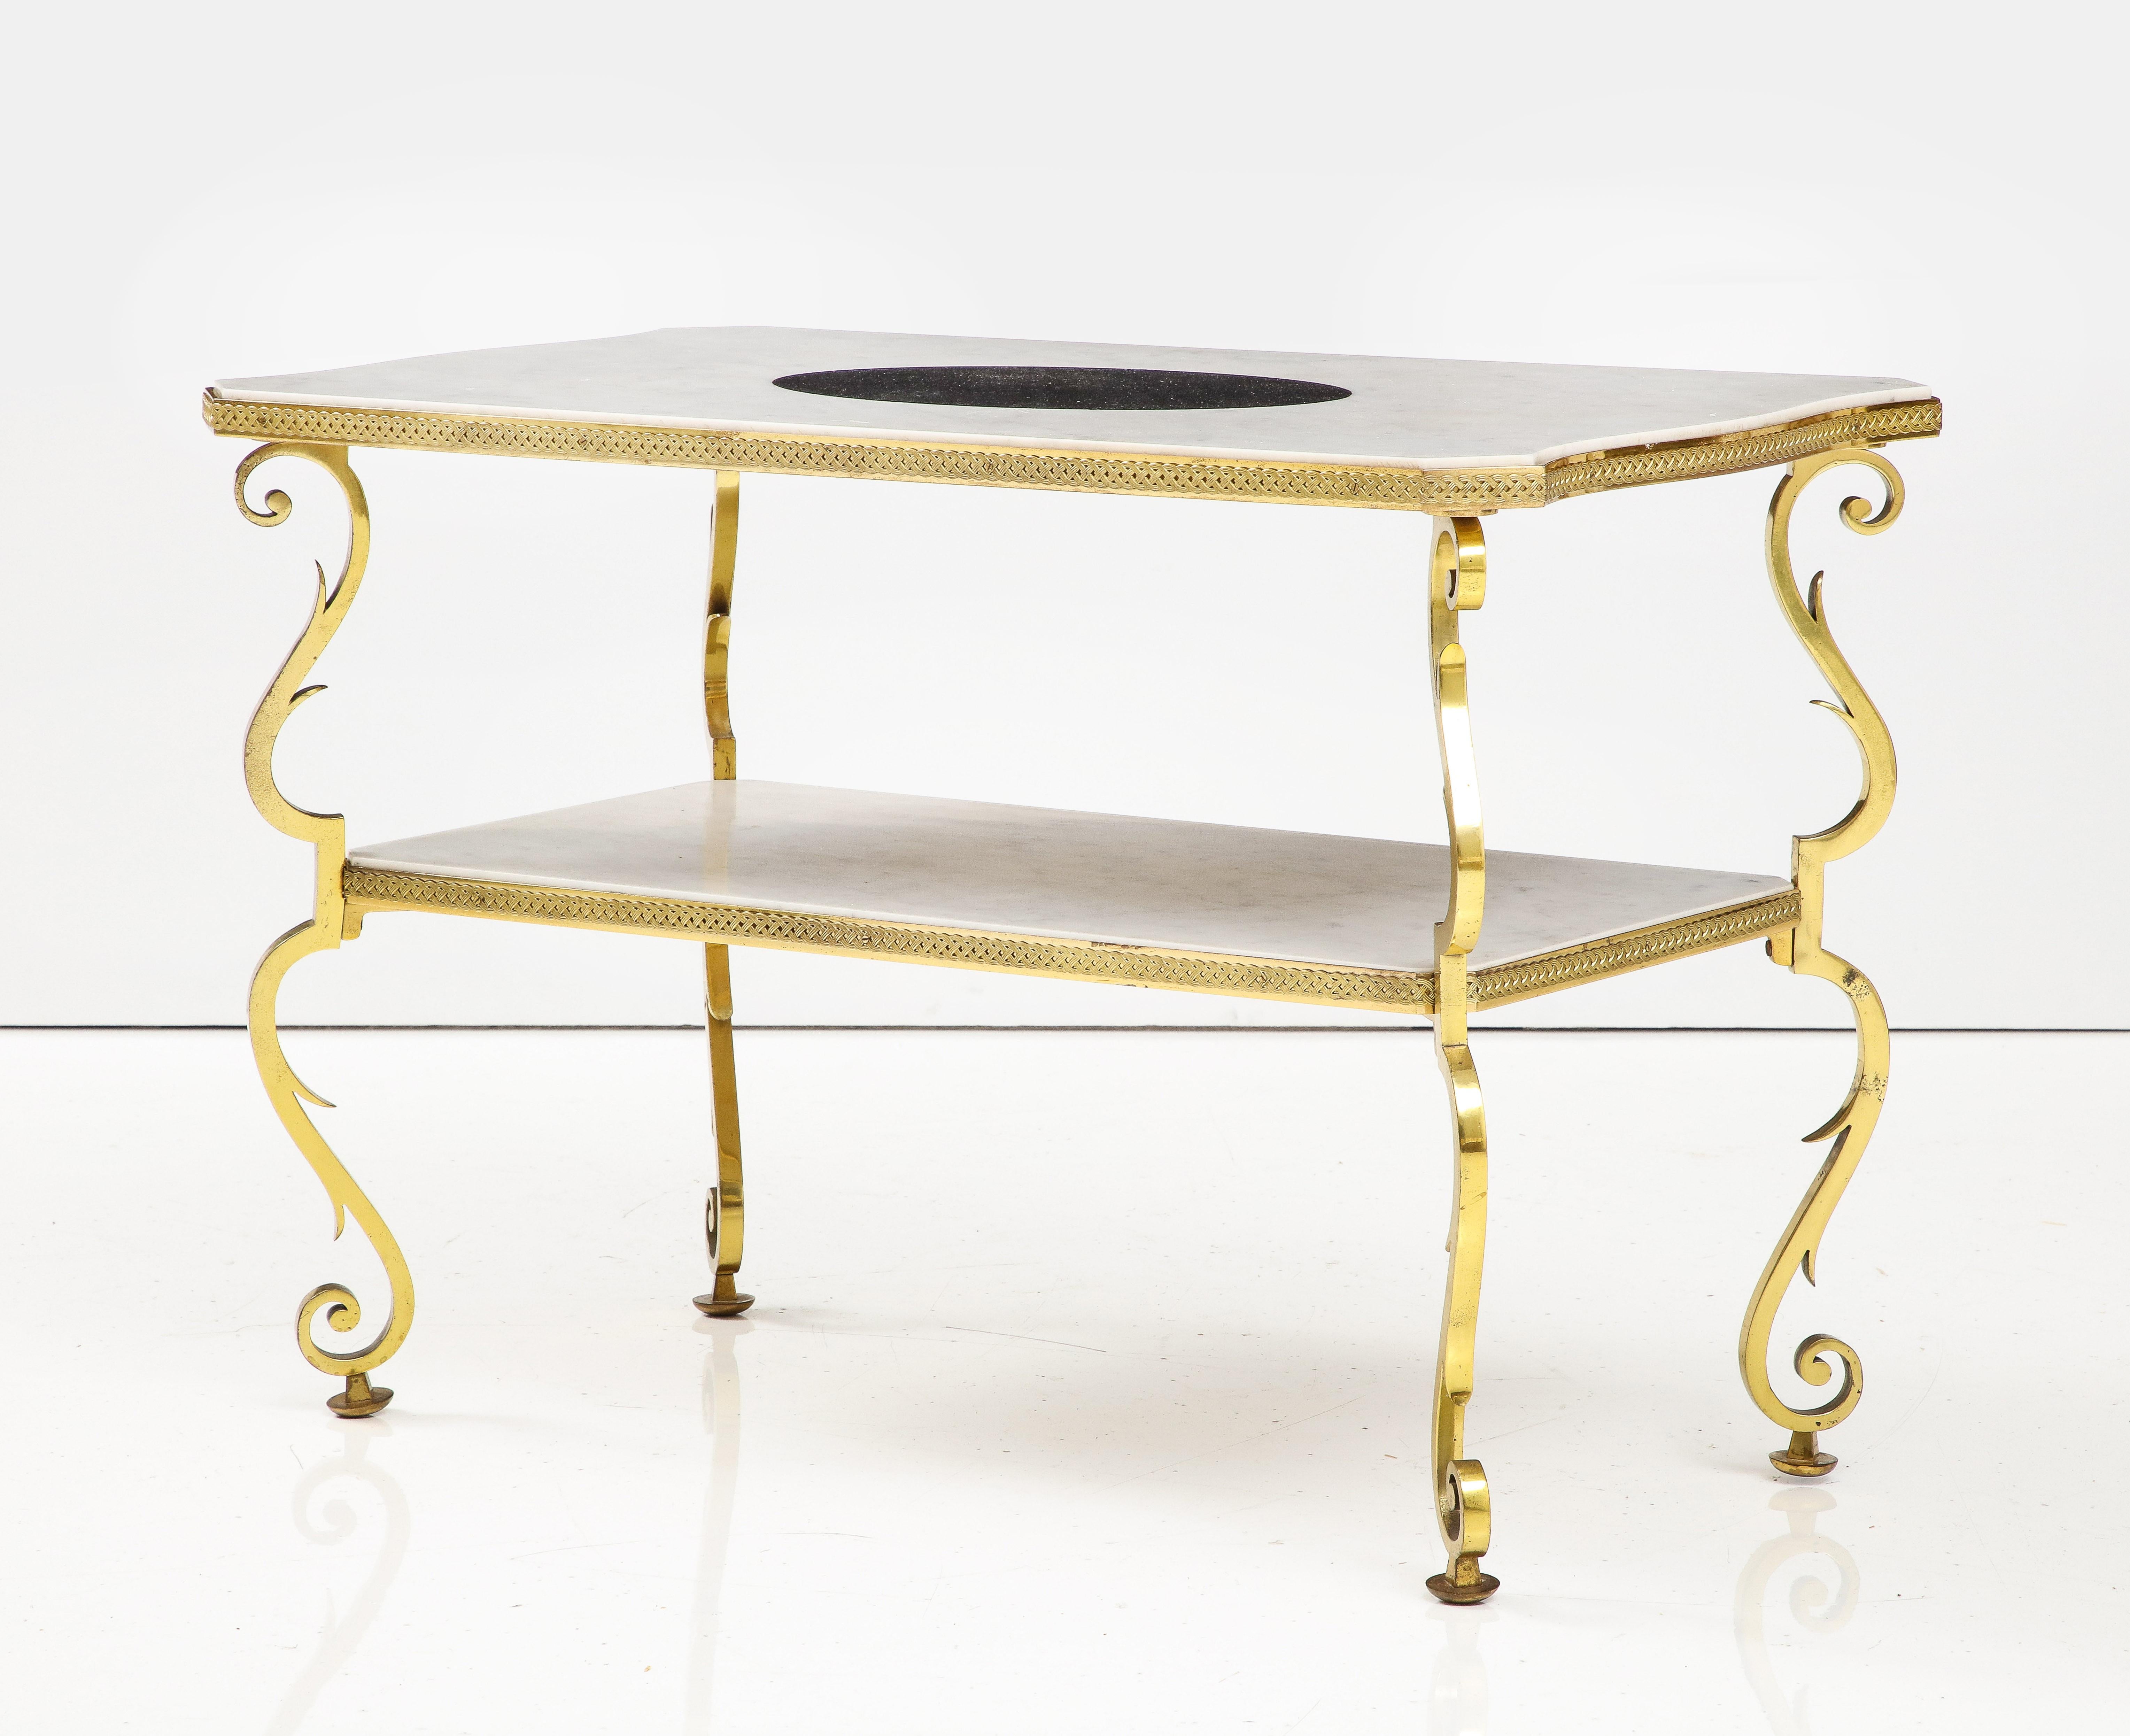 Marble and Gilded Bronze End Table by Gilbert Poillerat, France, c. 1950 For Sale 9